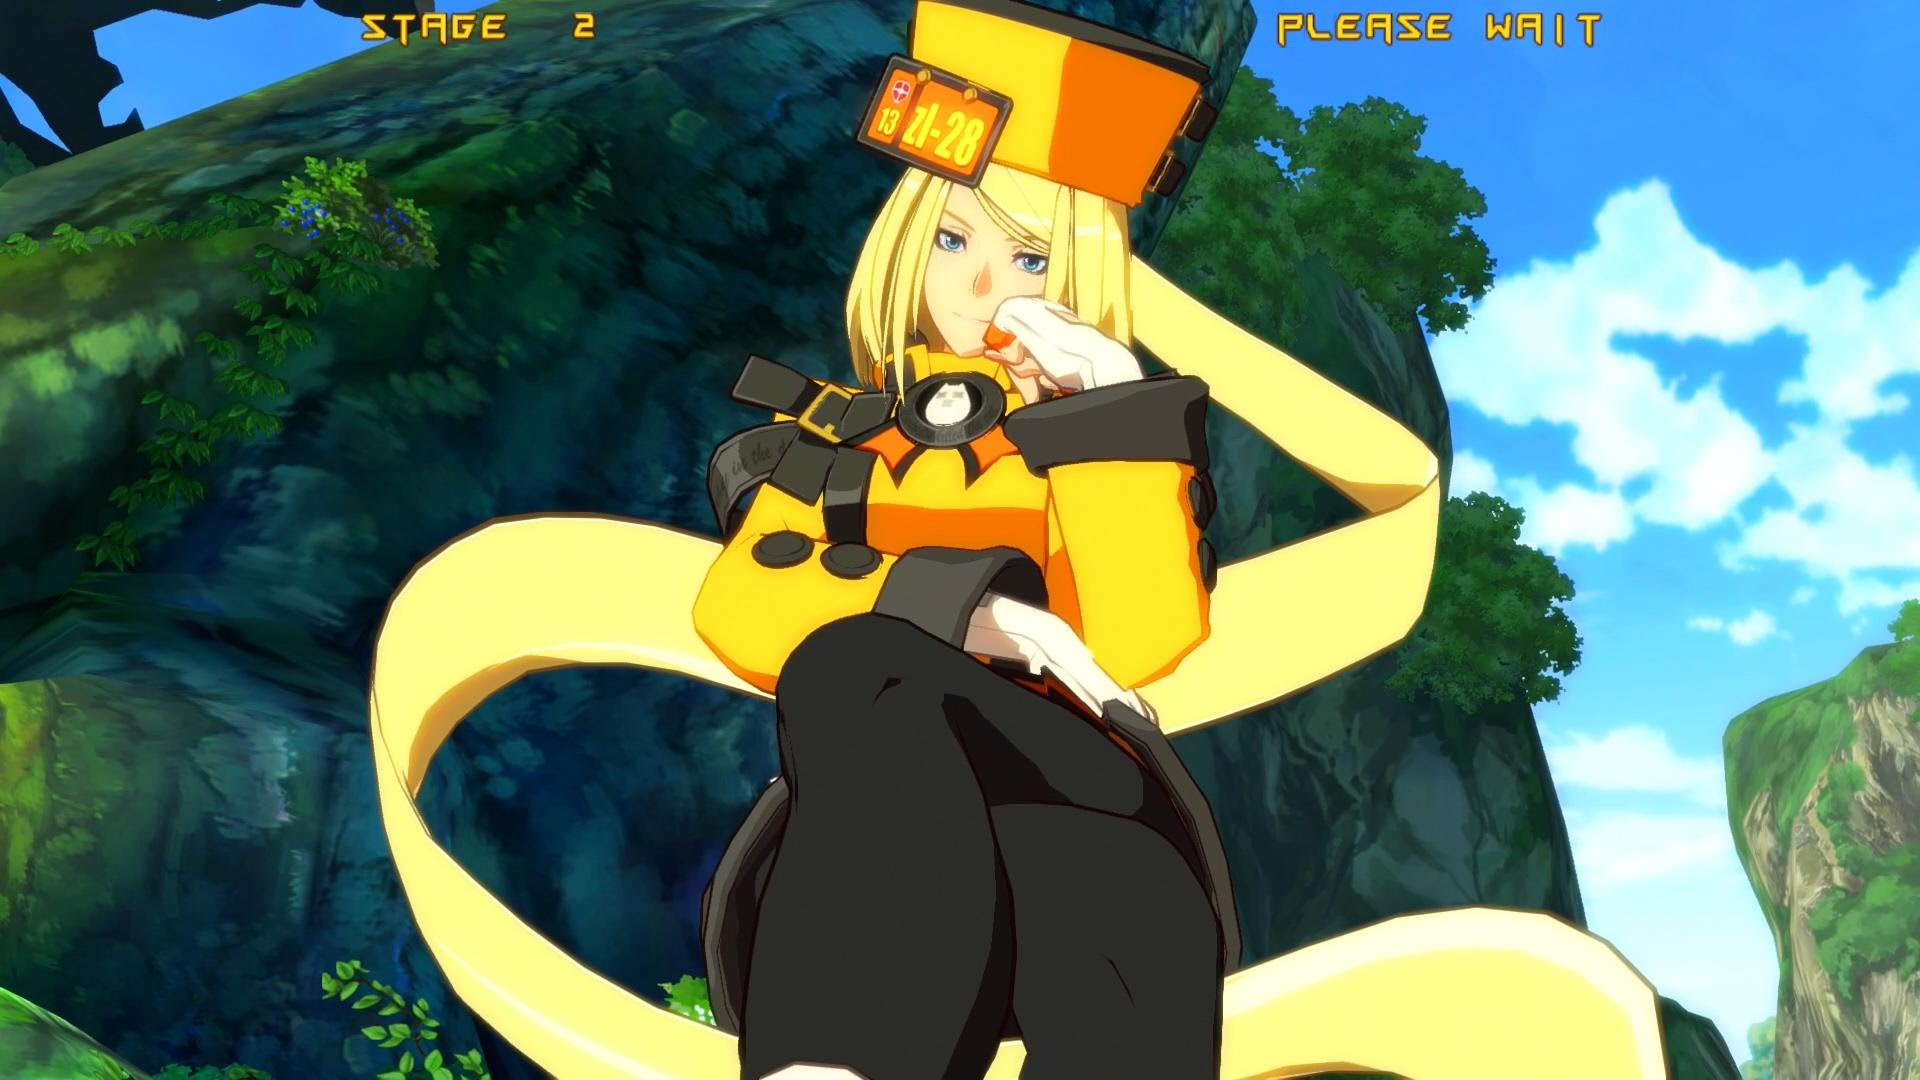 Performance tweaks for the Low End PC (Working) for GUILTY GEAR Xrd -REVELATOR-